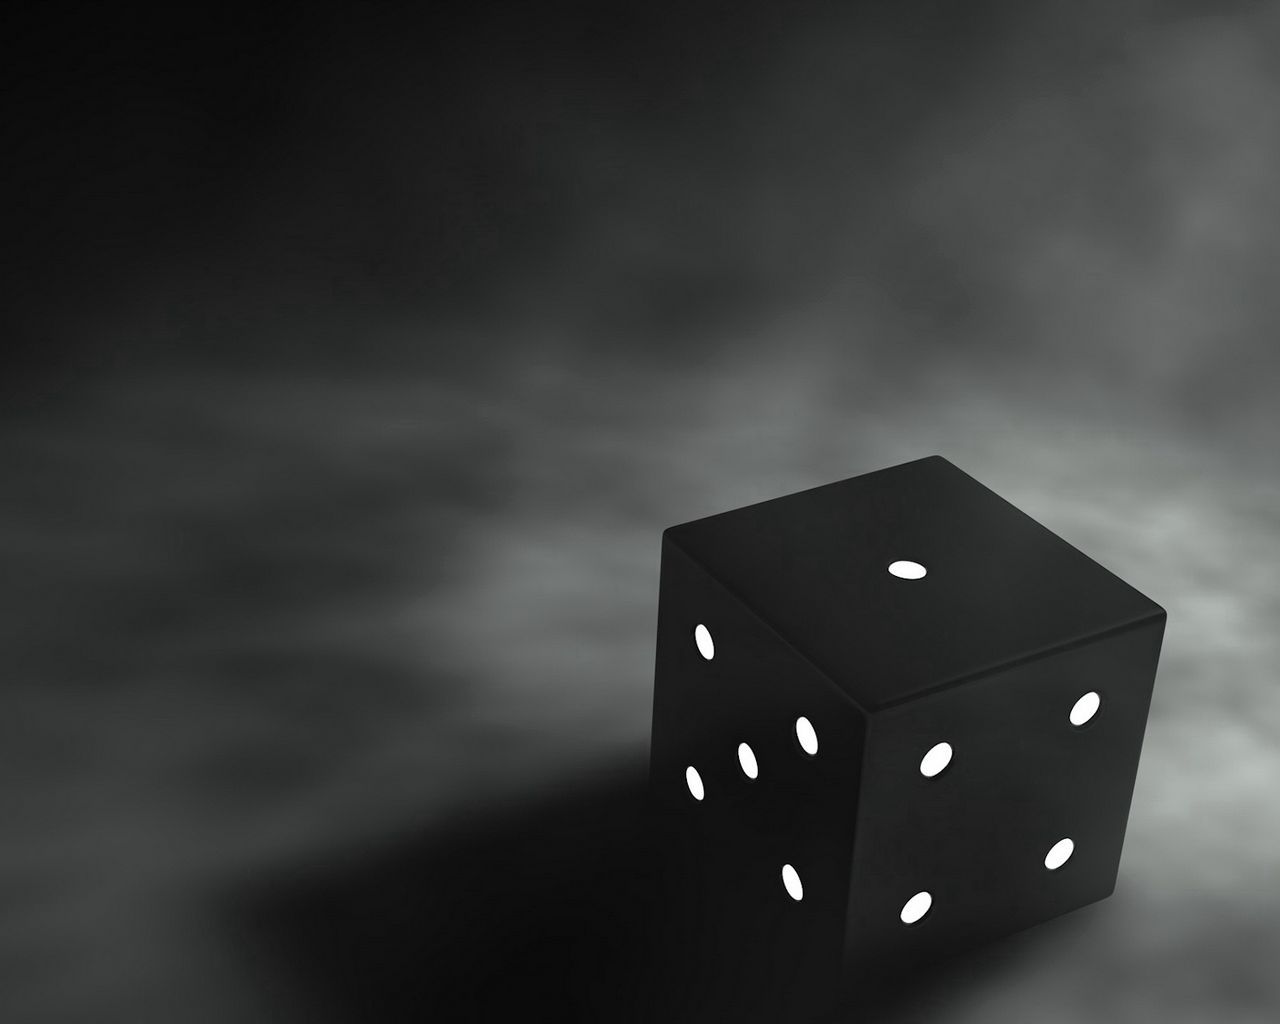 Download wallpaper 1280x1024 cube, 3D, graphics, black, gray background, 3D graphics standard 5:4 HD background